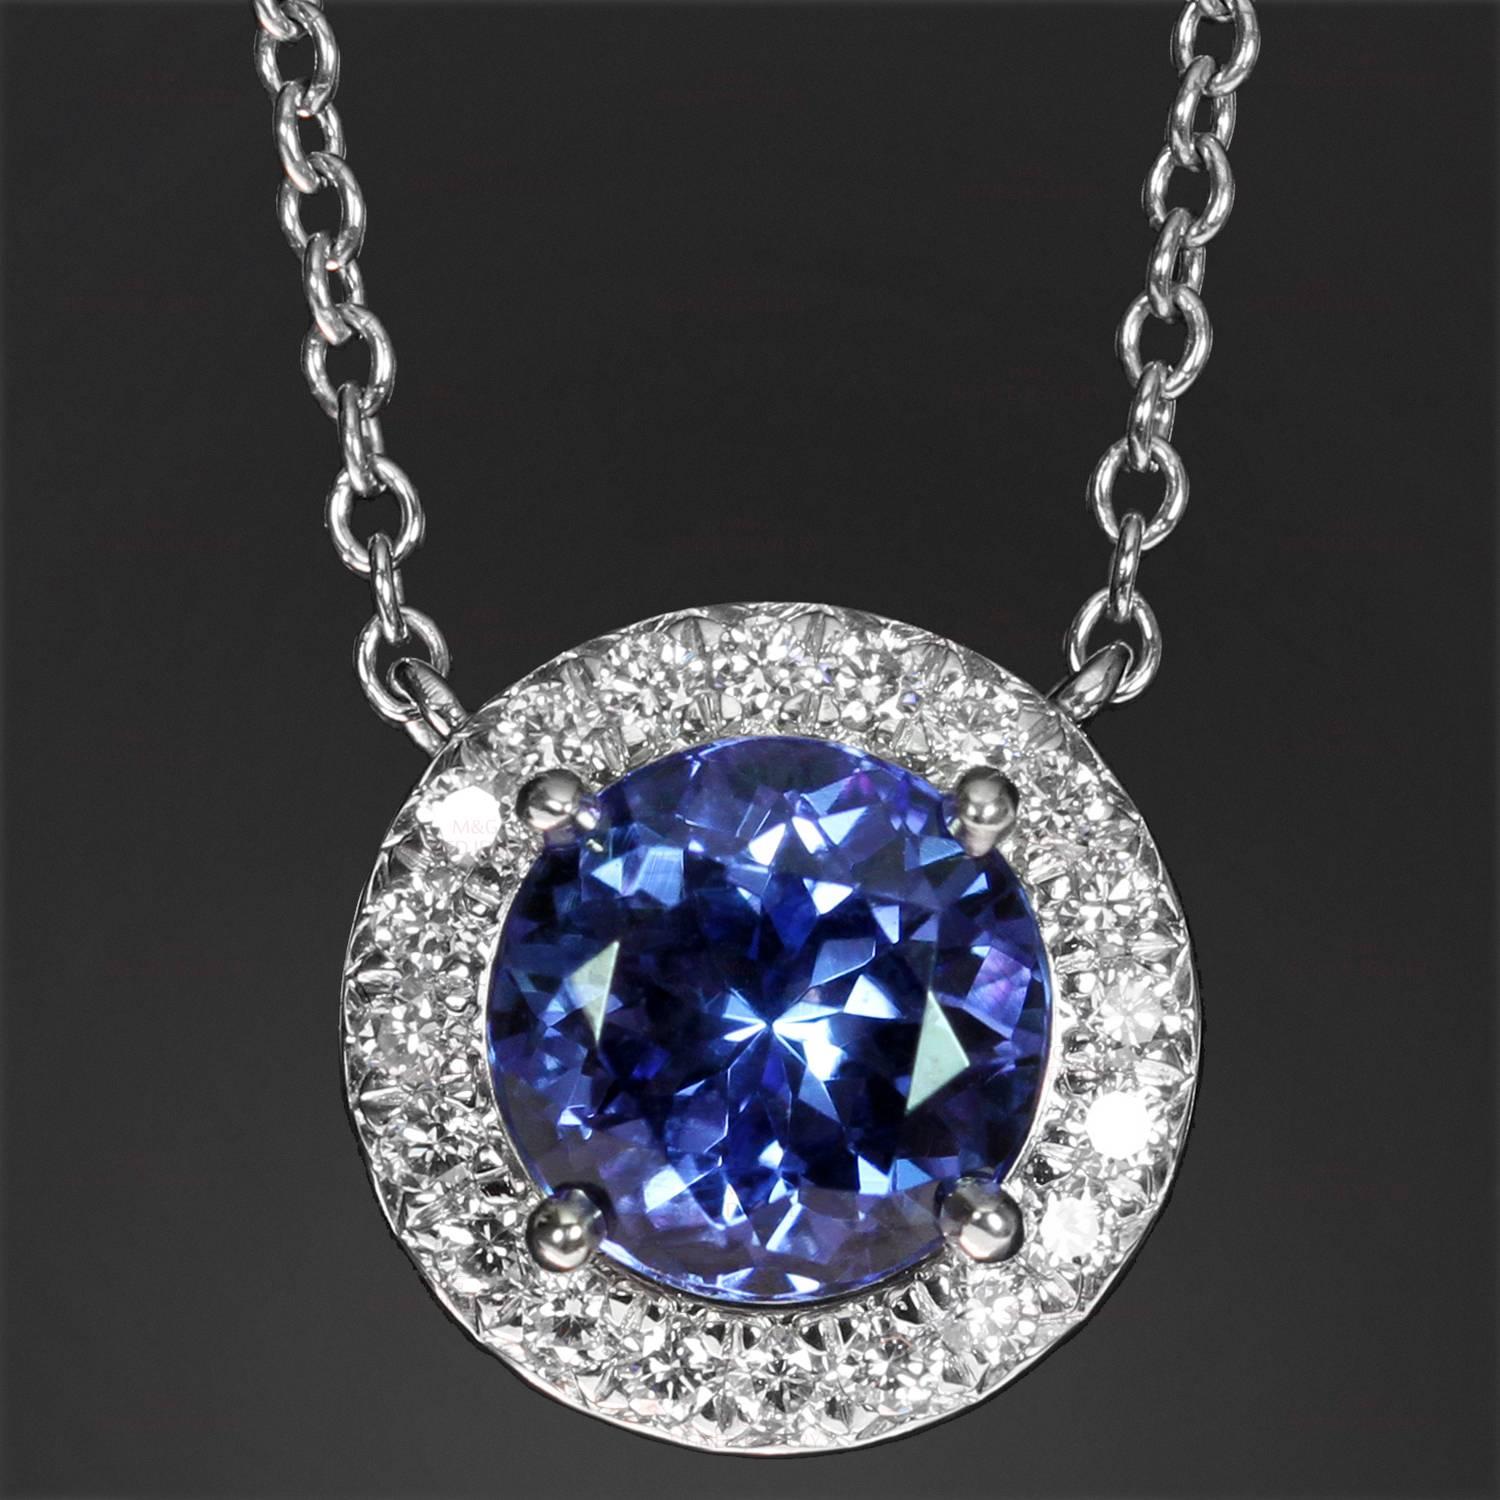 This stunning necklace from Tiffany's Seleste collection is crafted in platinum and features a round pendant set with a dazzling tanzanite of an estimated 0.70 carats surrounded by brilliant-cut round diamonds of an estimated 0.10 carats. Made in